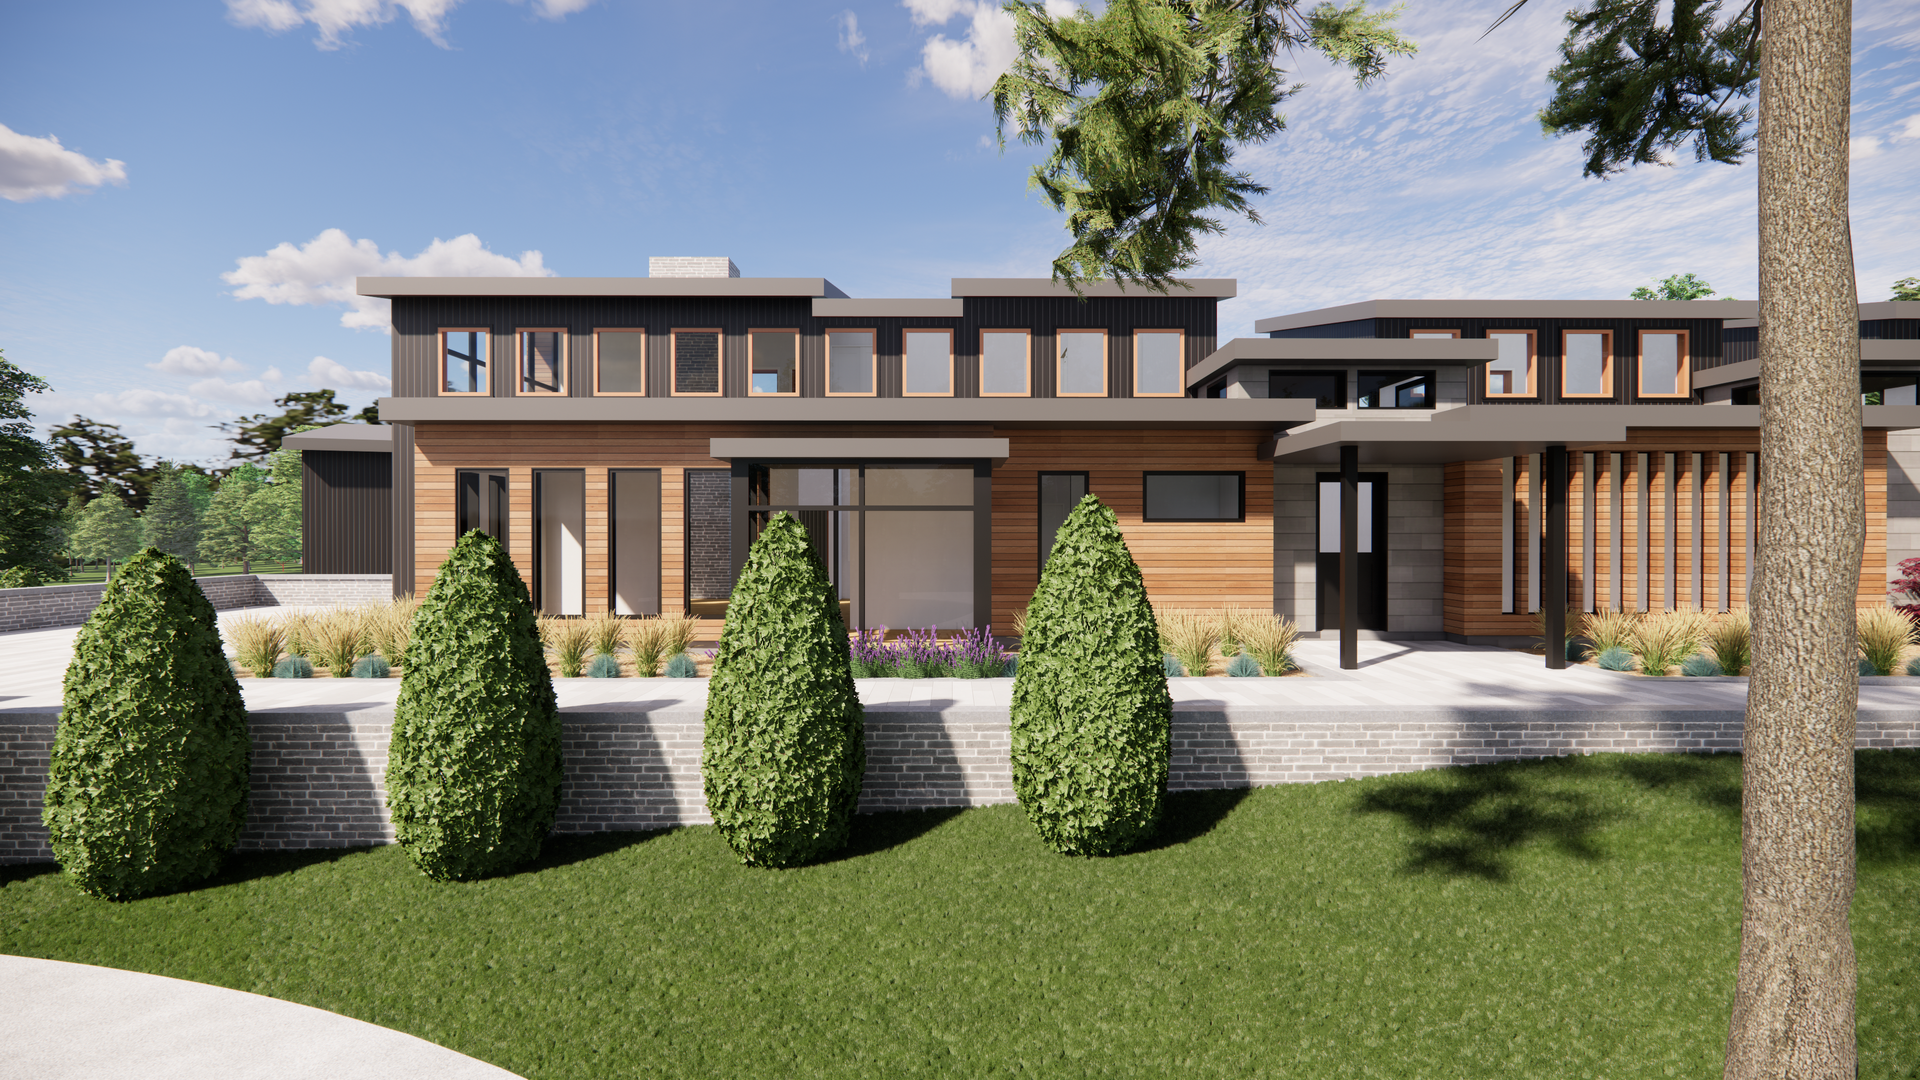 Rendering of a Home